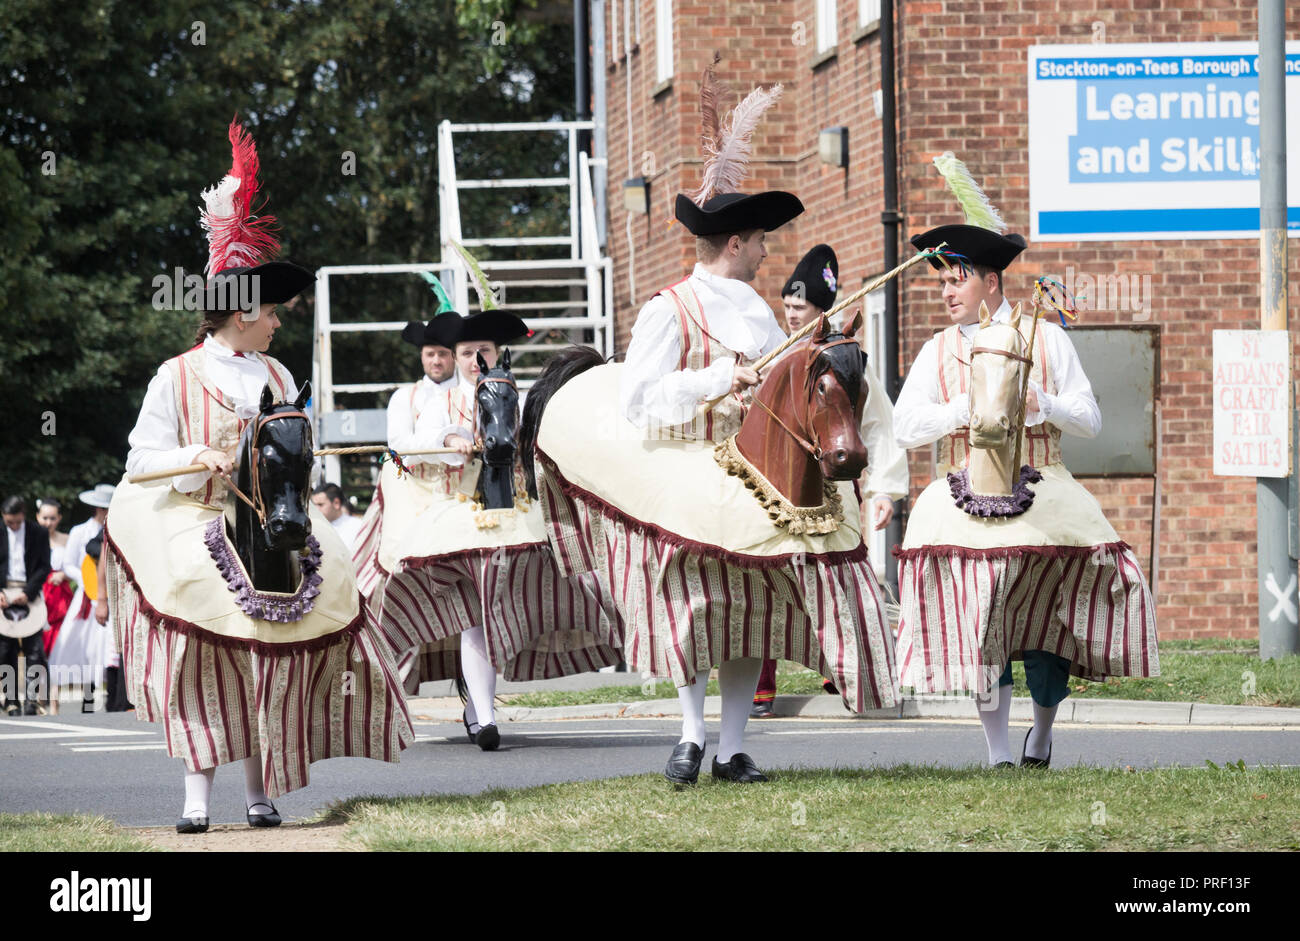 Dancers from France at the opening day of the Billingham International Folklore Festival of World Dance. UK Stock Photo